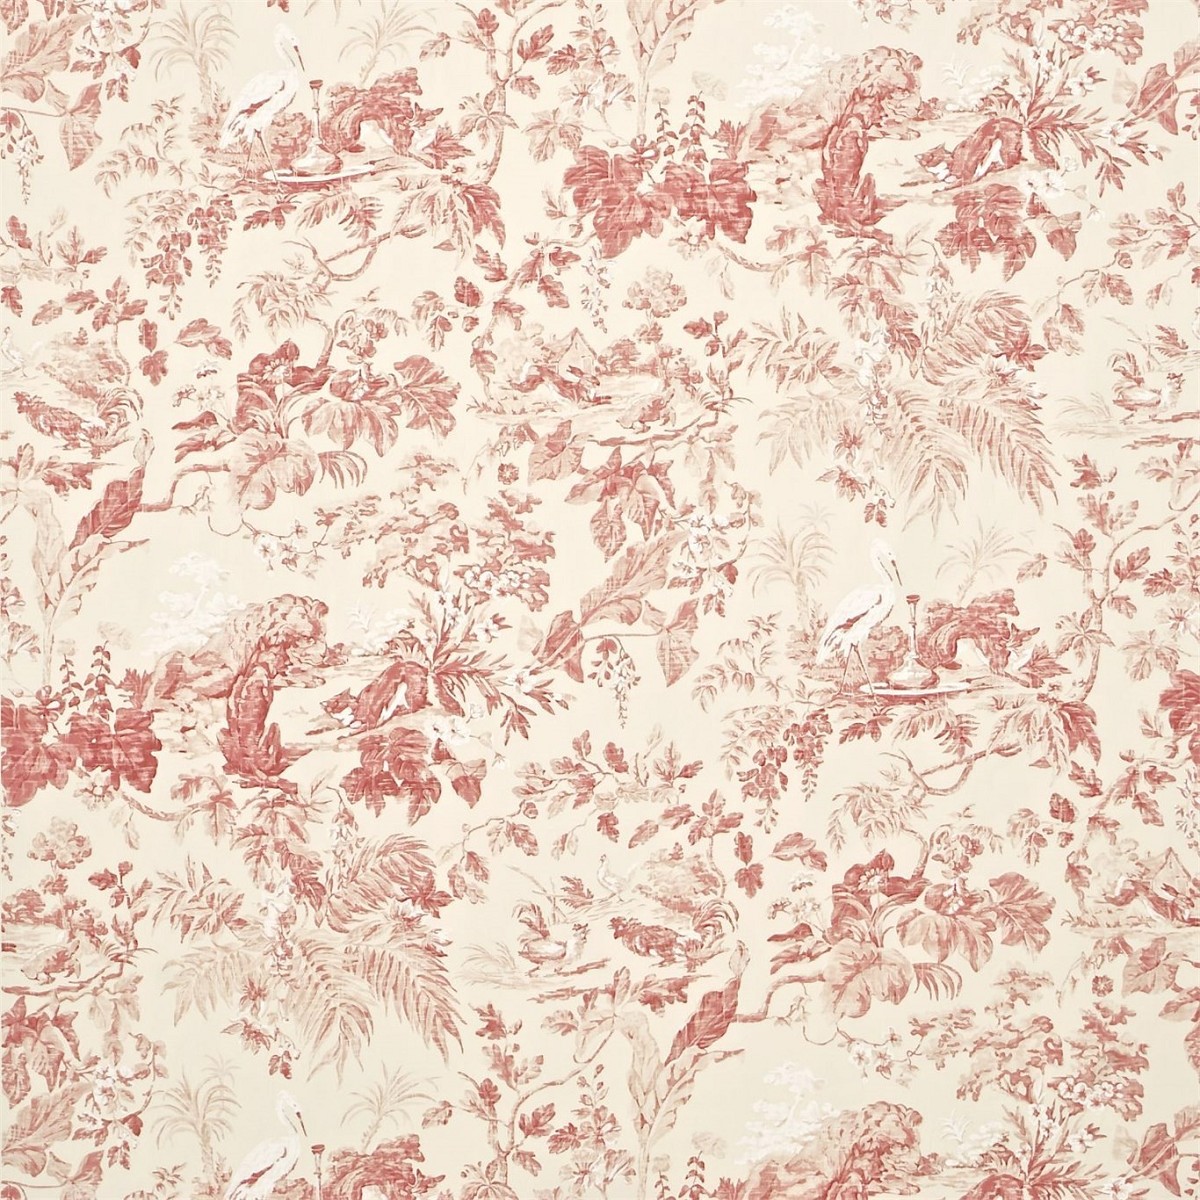 Aesops Fables Pink Fabric by Sanderson